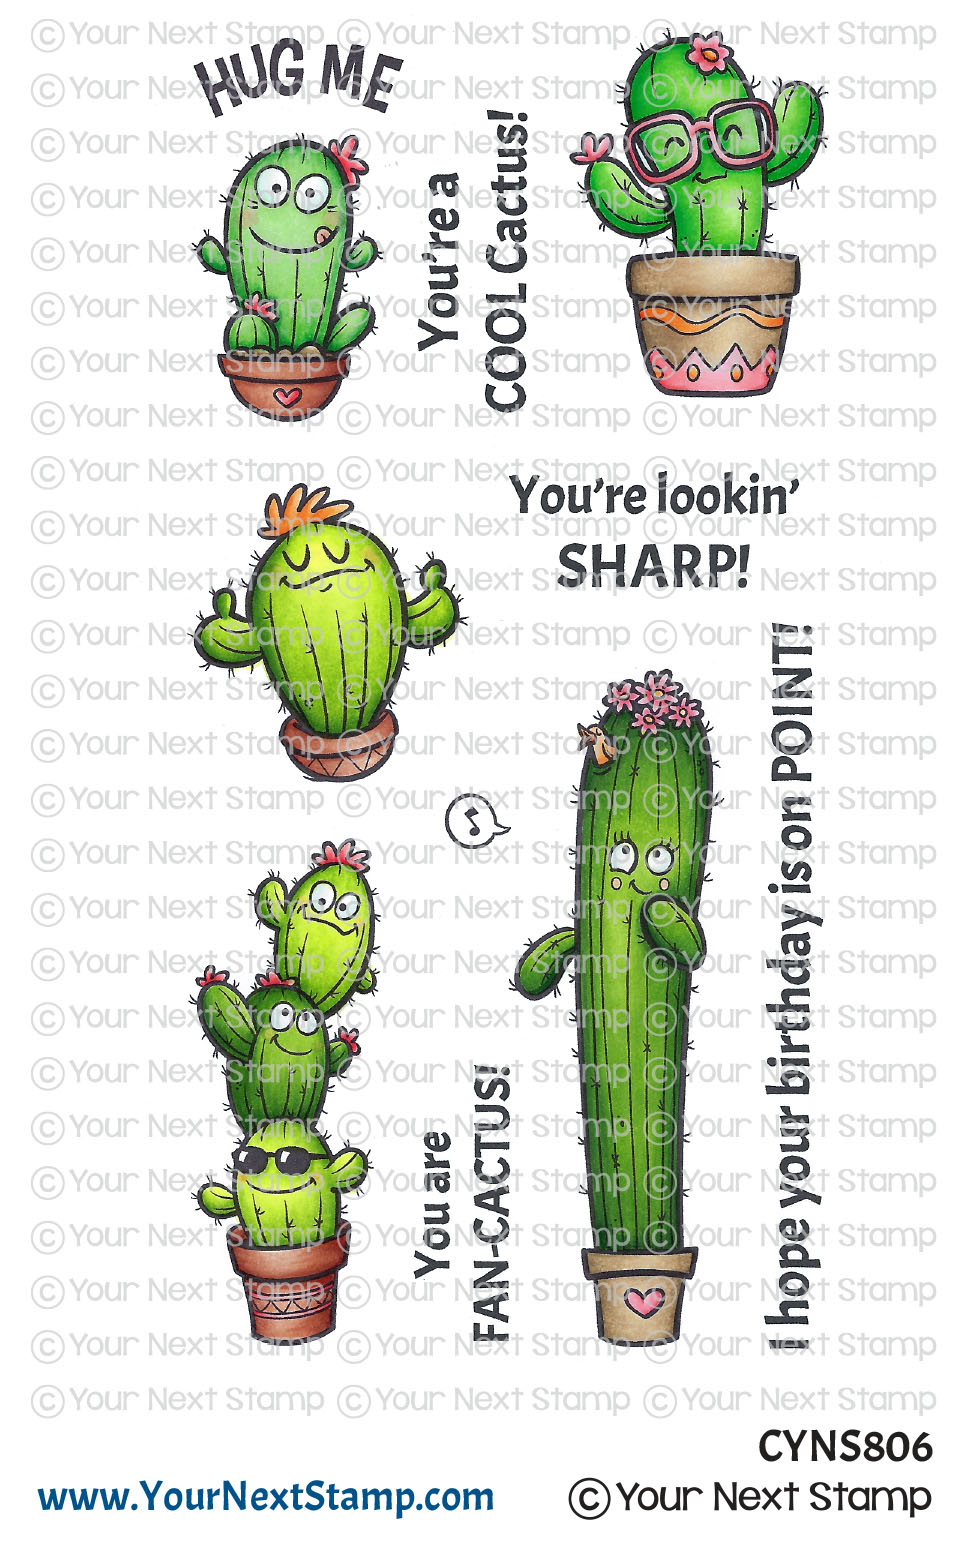 Cactus Rubber Stamps, Set of 5, Mini Stamps, Hand Carved, Succulent Plants,  Cactus Plants, Cacti 